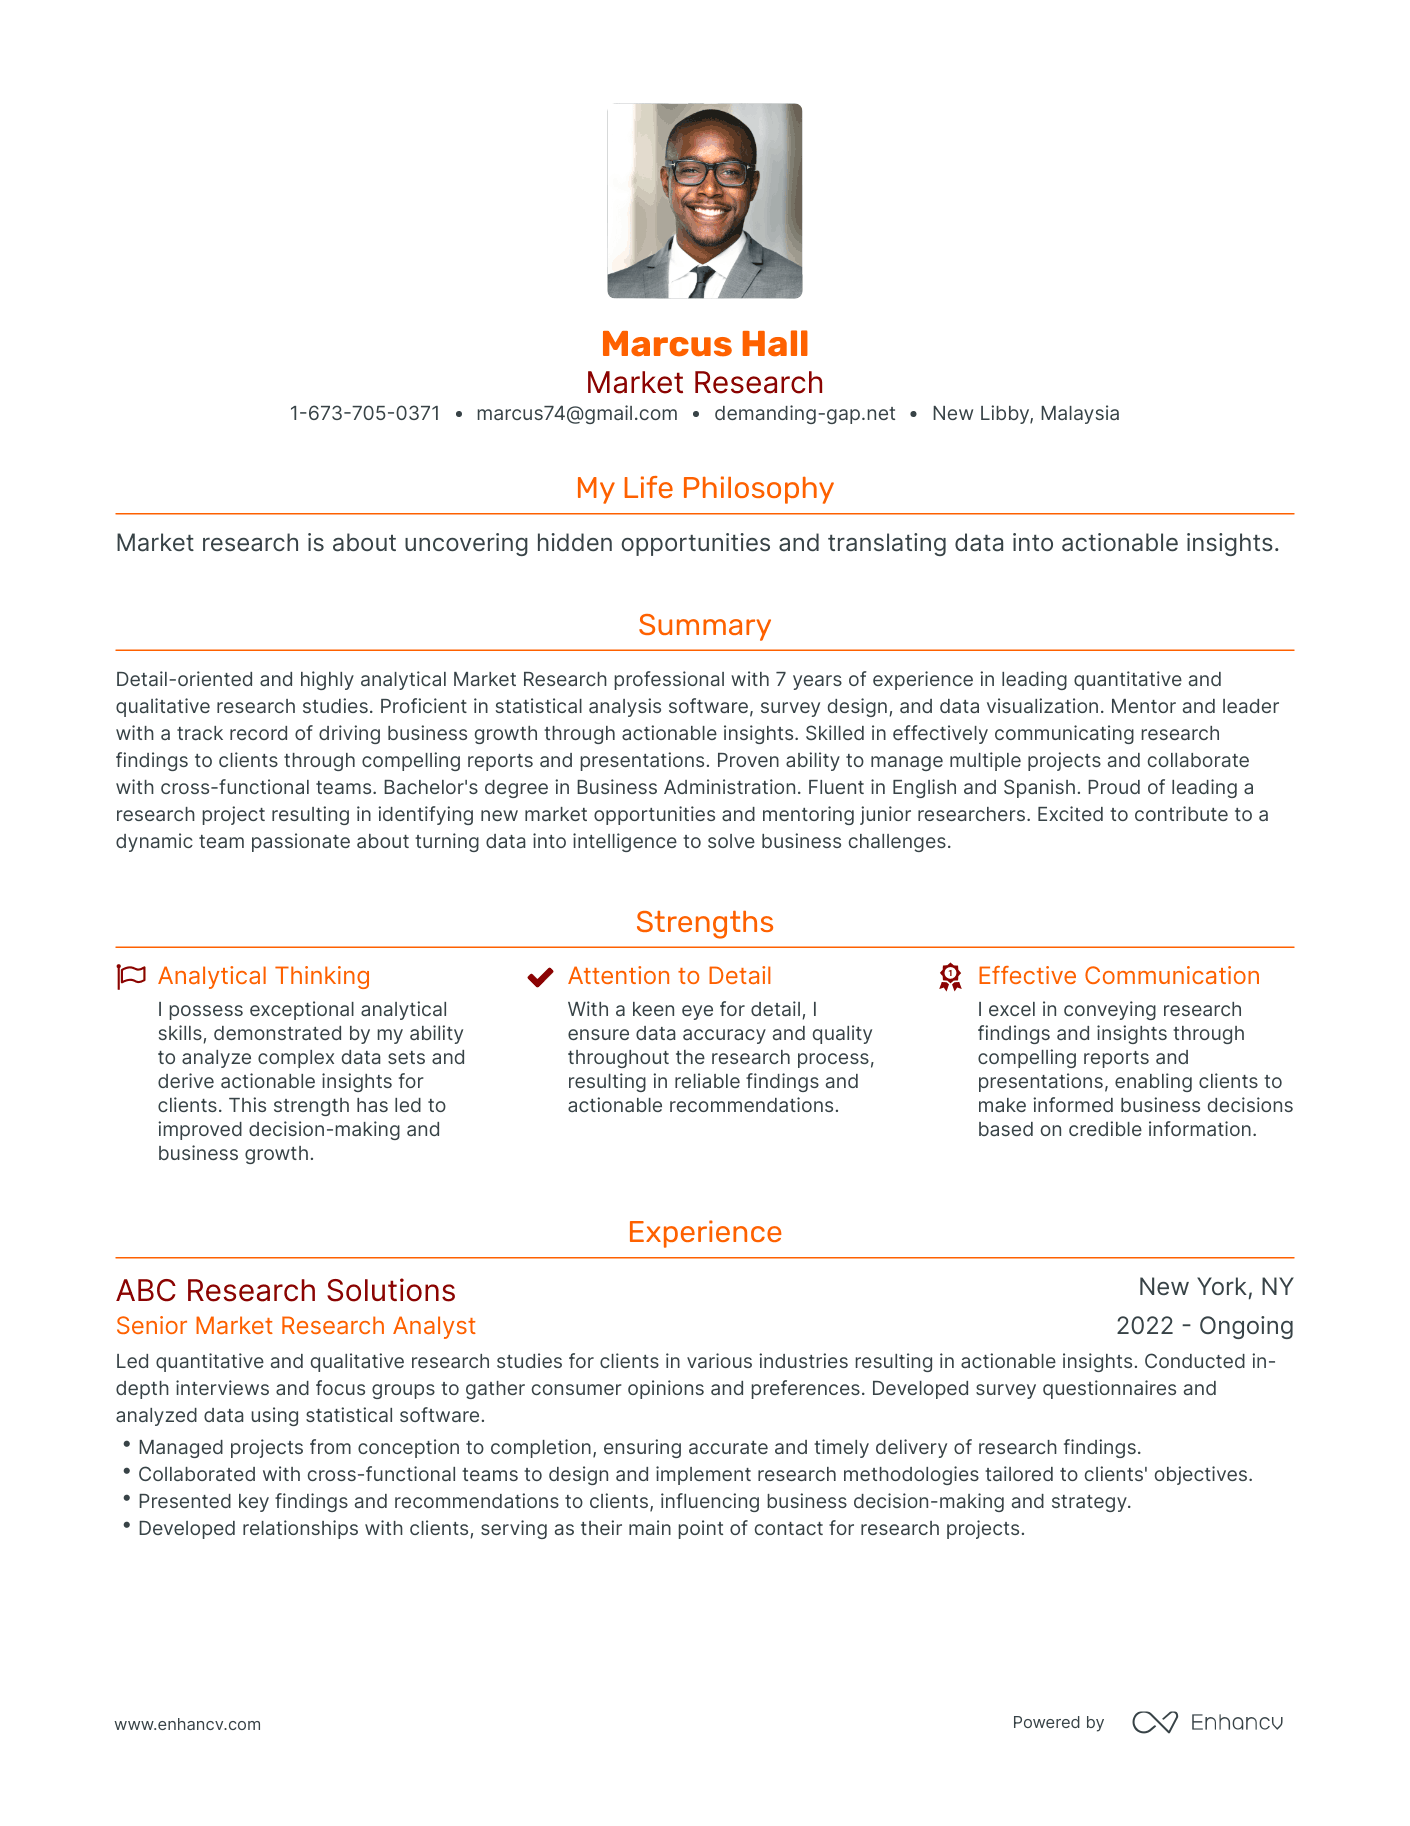 Modern Market Research Resume Example